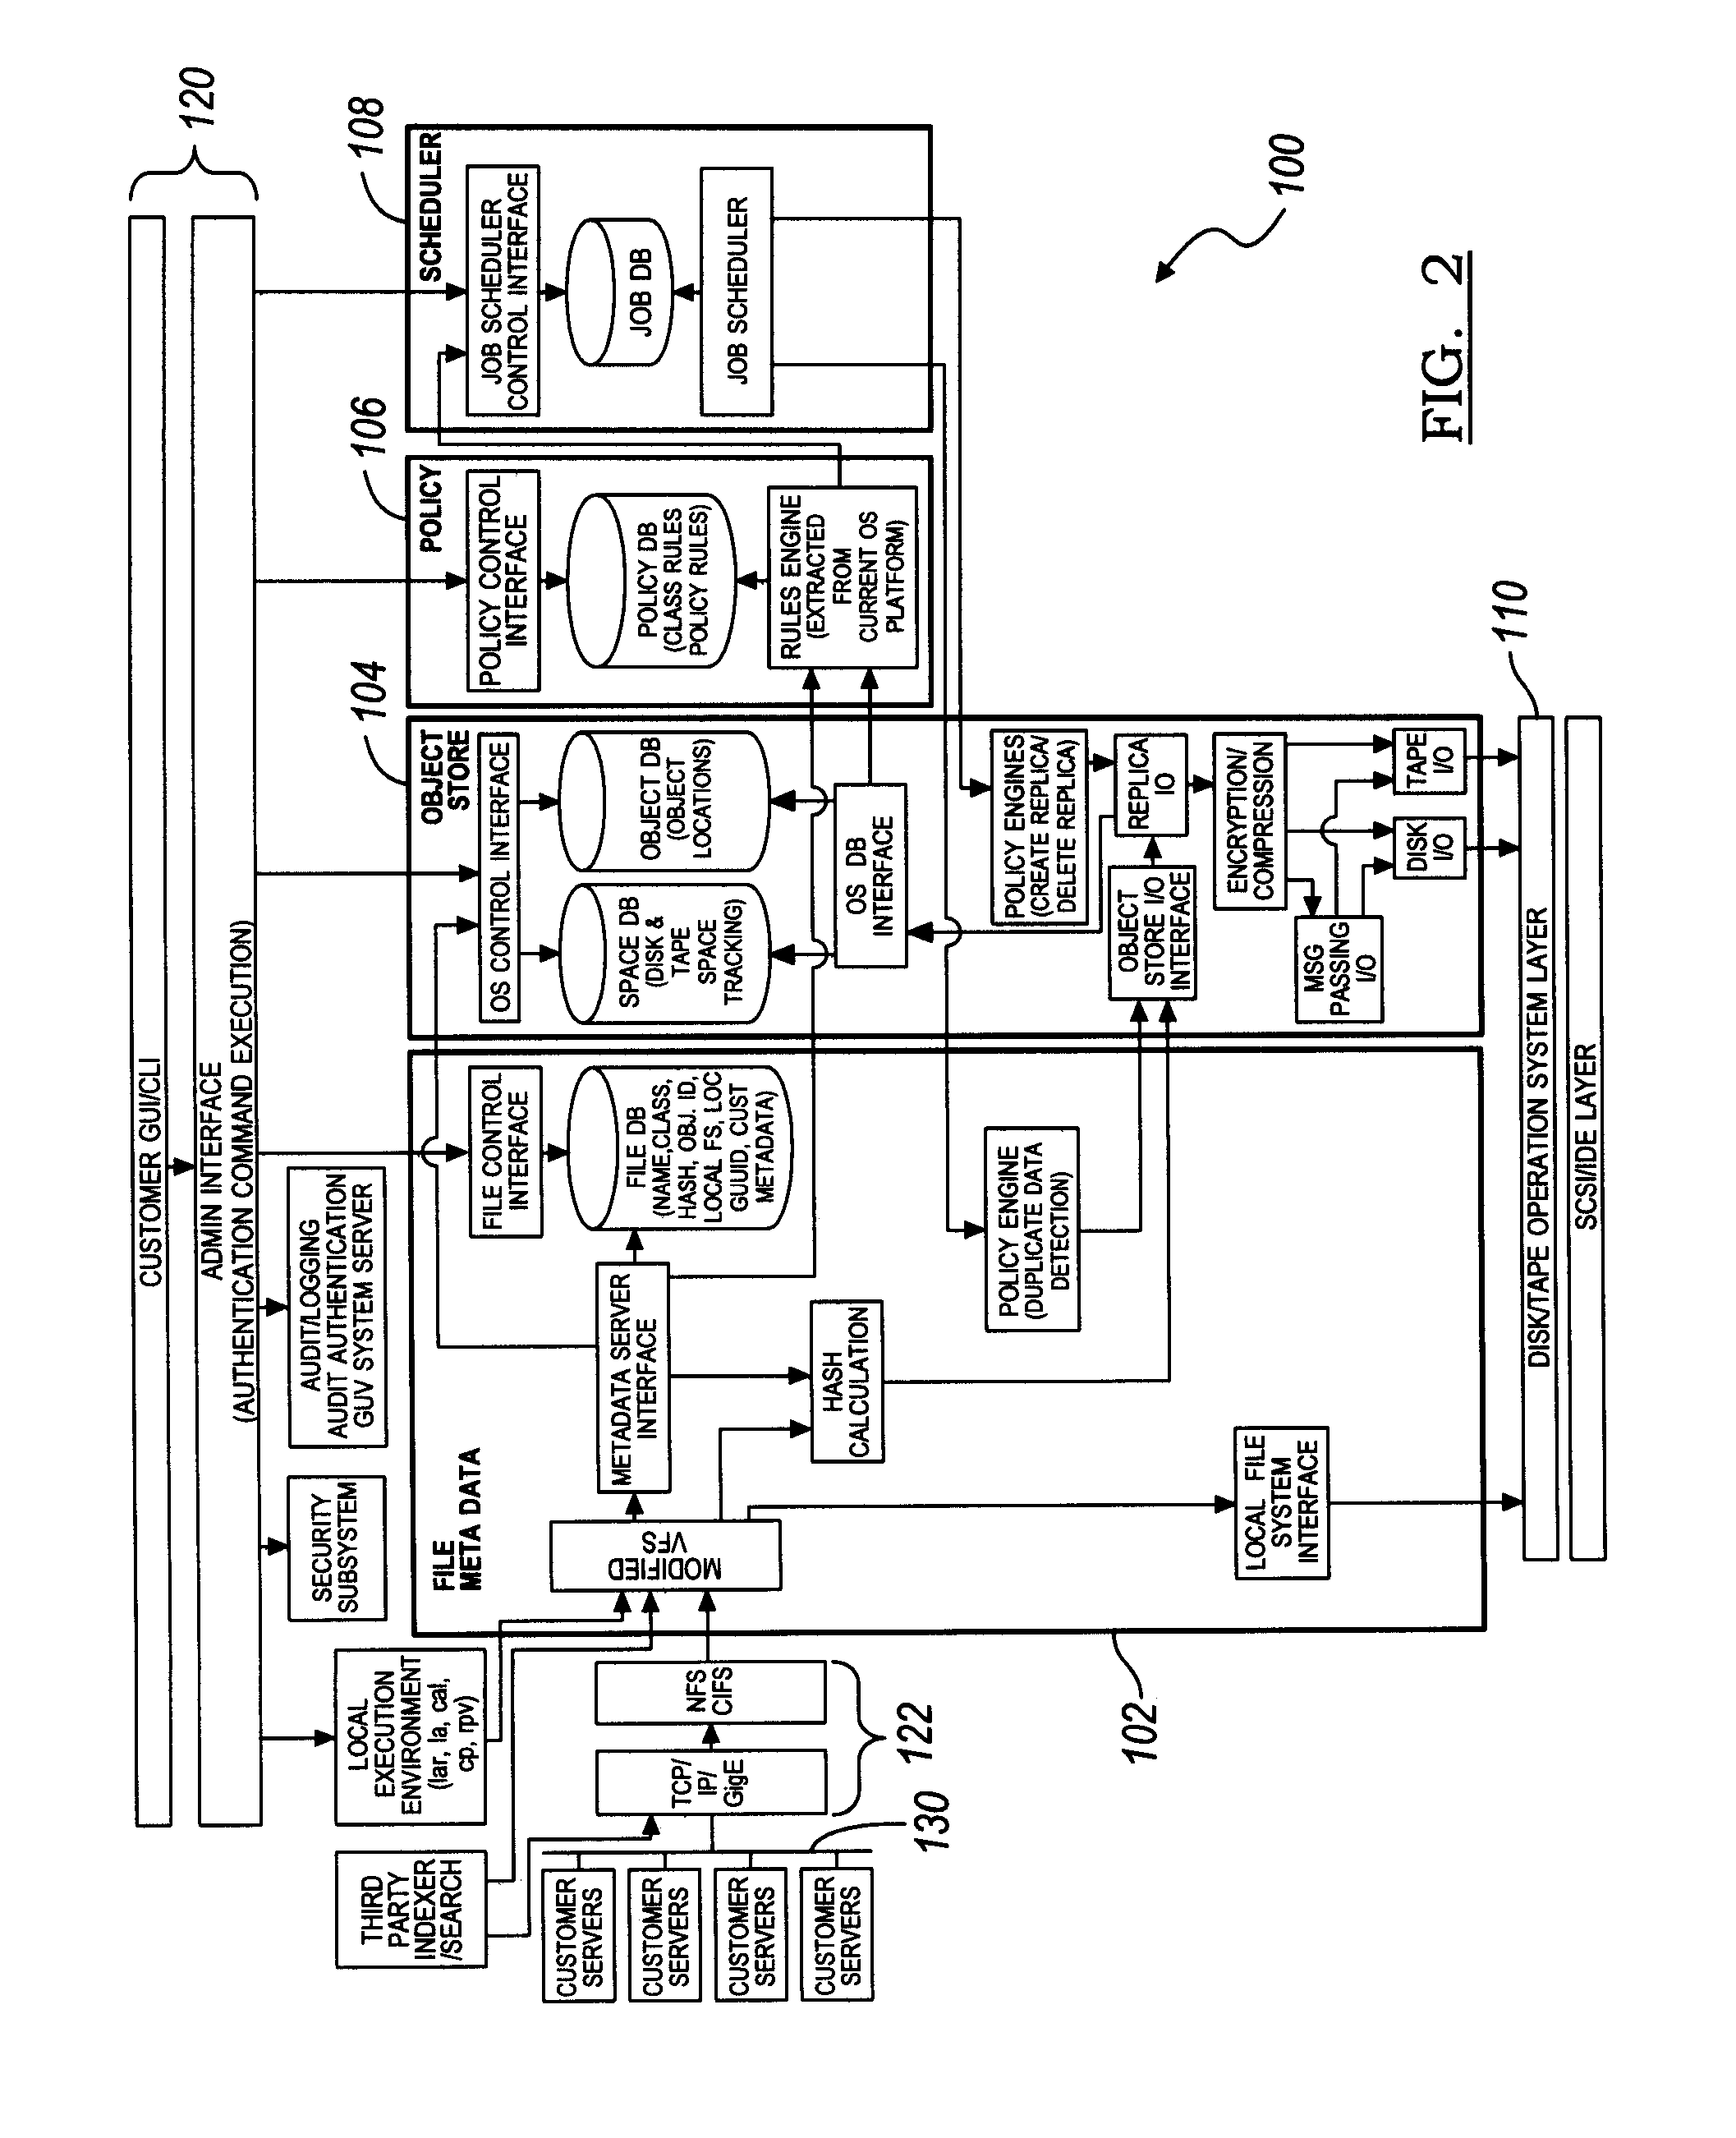 Clustered Hierarchical File System